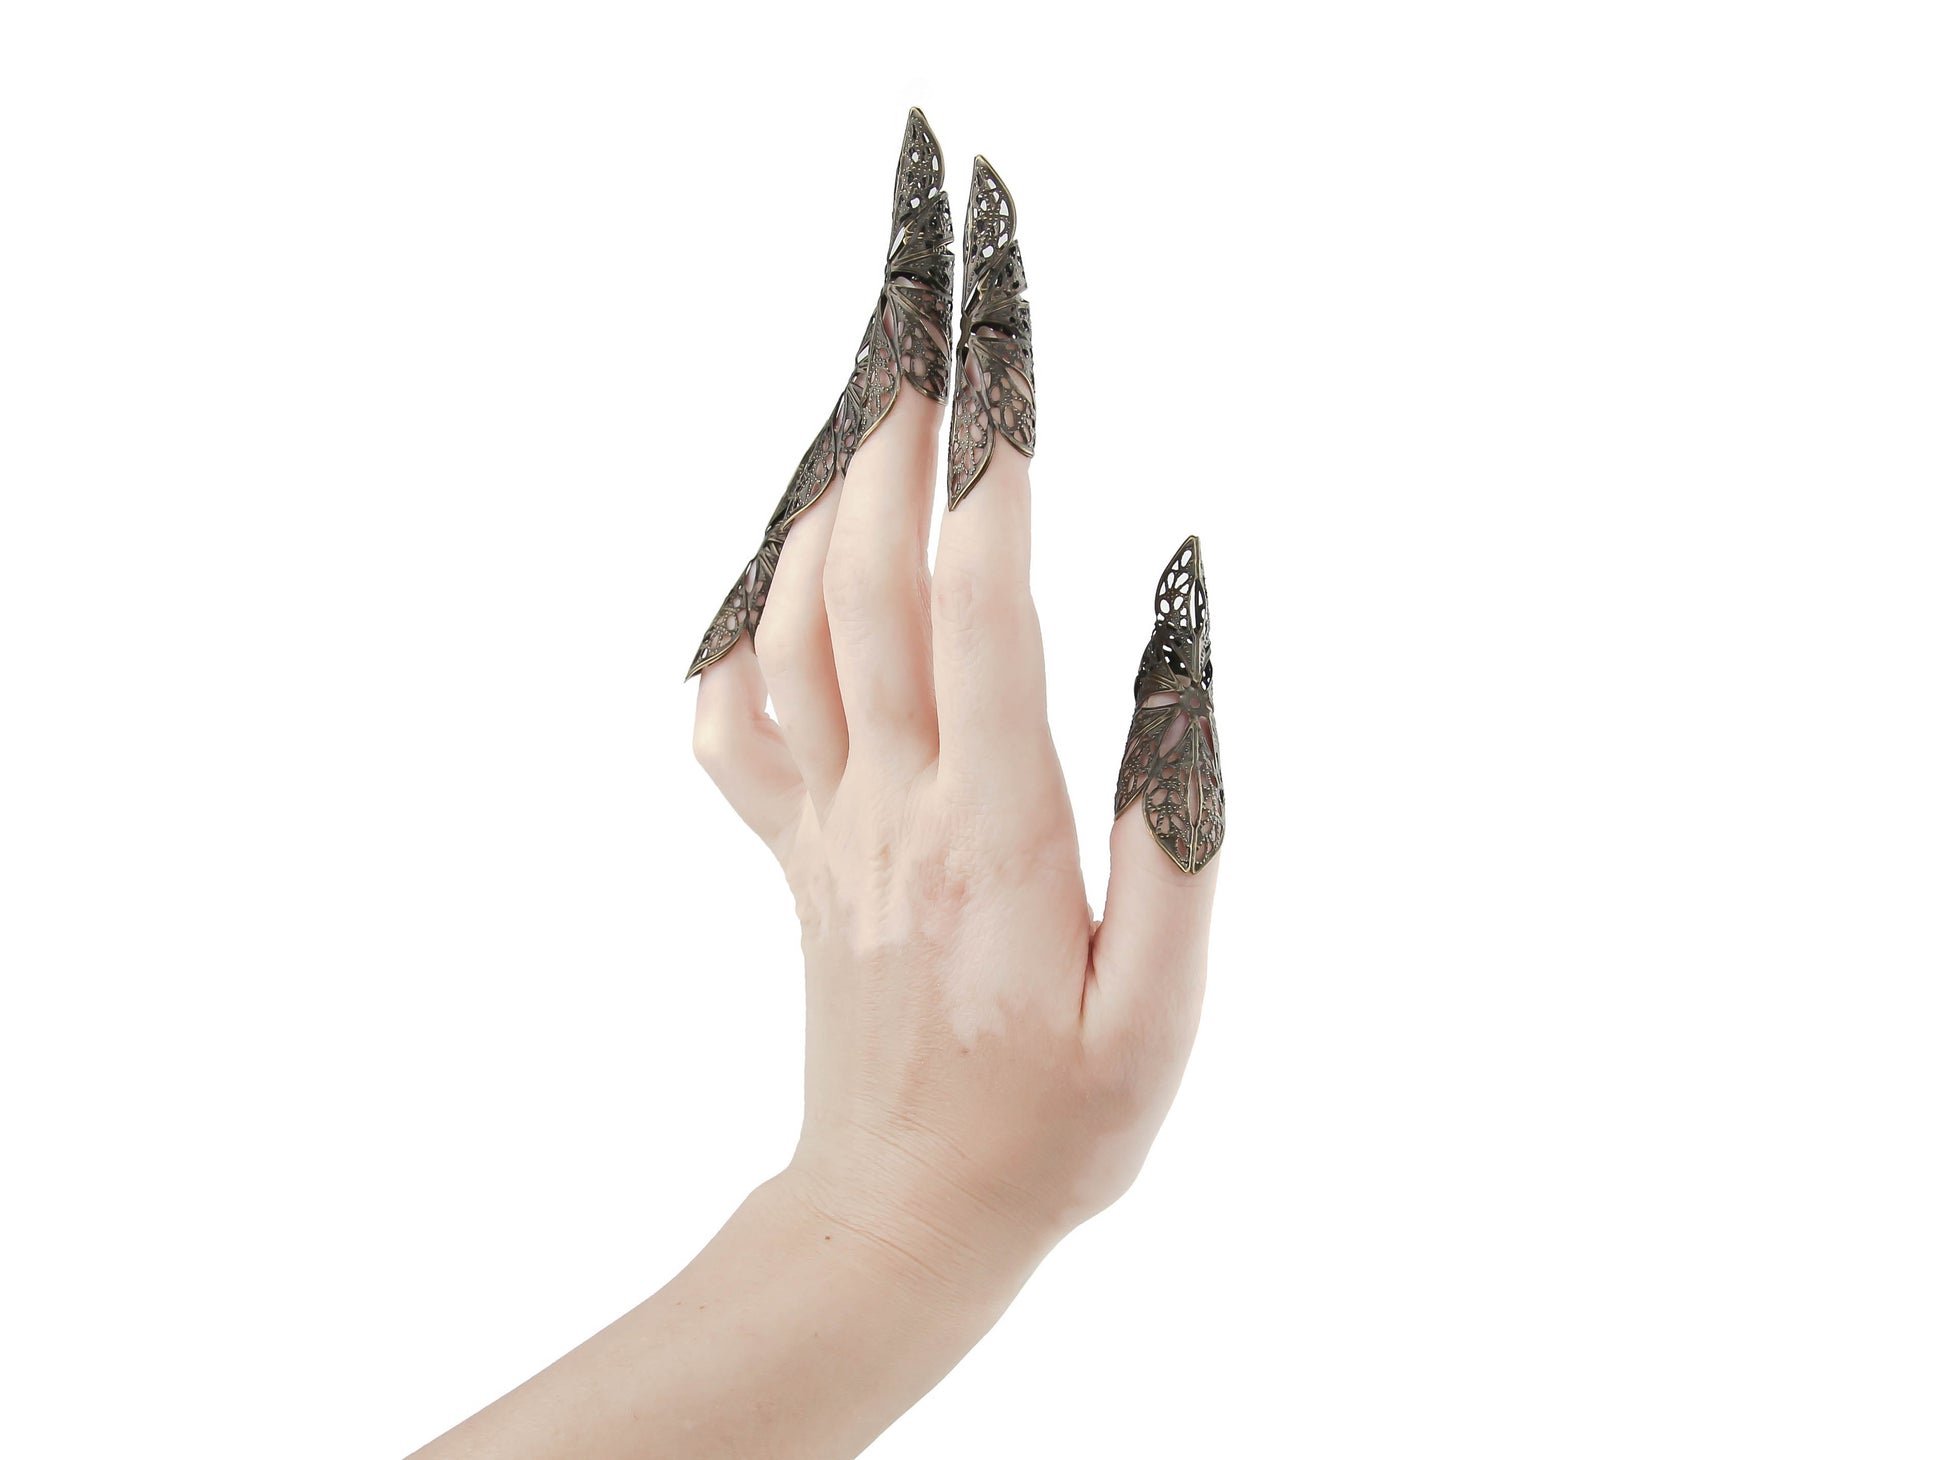 Delve into the world of Myril Jewels with these striking long bronze nail claws, embodying the essence of neo-gothic jewelry. These intricately designed pieces are perfect for Halloween, capturing the gothic-chic spirit and offering a bold touch to rave or festival outfits. They're a daring addition to any witchcore or minimal goth collection, making them an exceptional gift for the goth girlfriend who adores unique, statement jewelry.